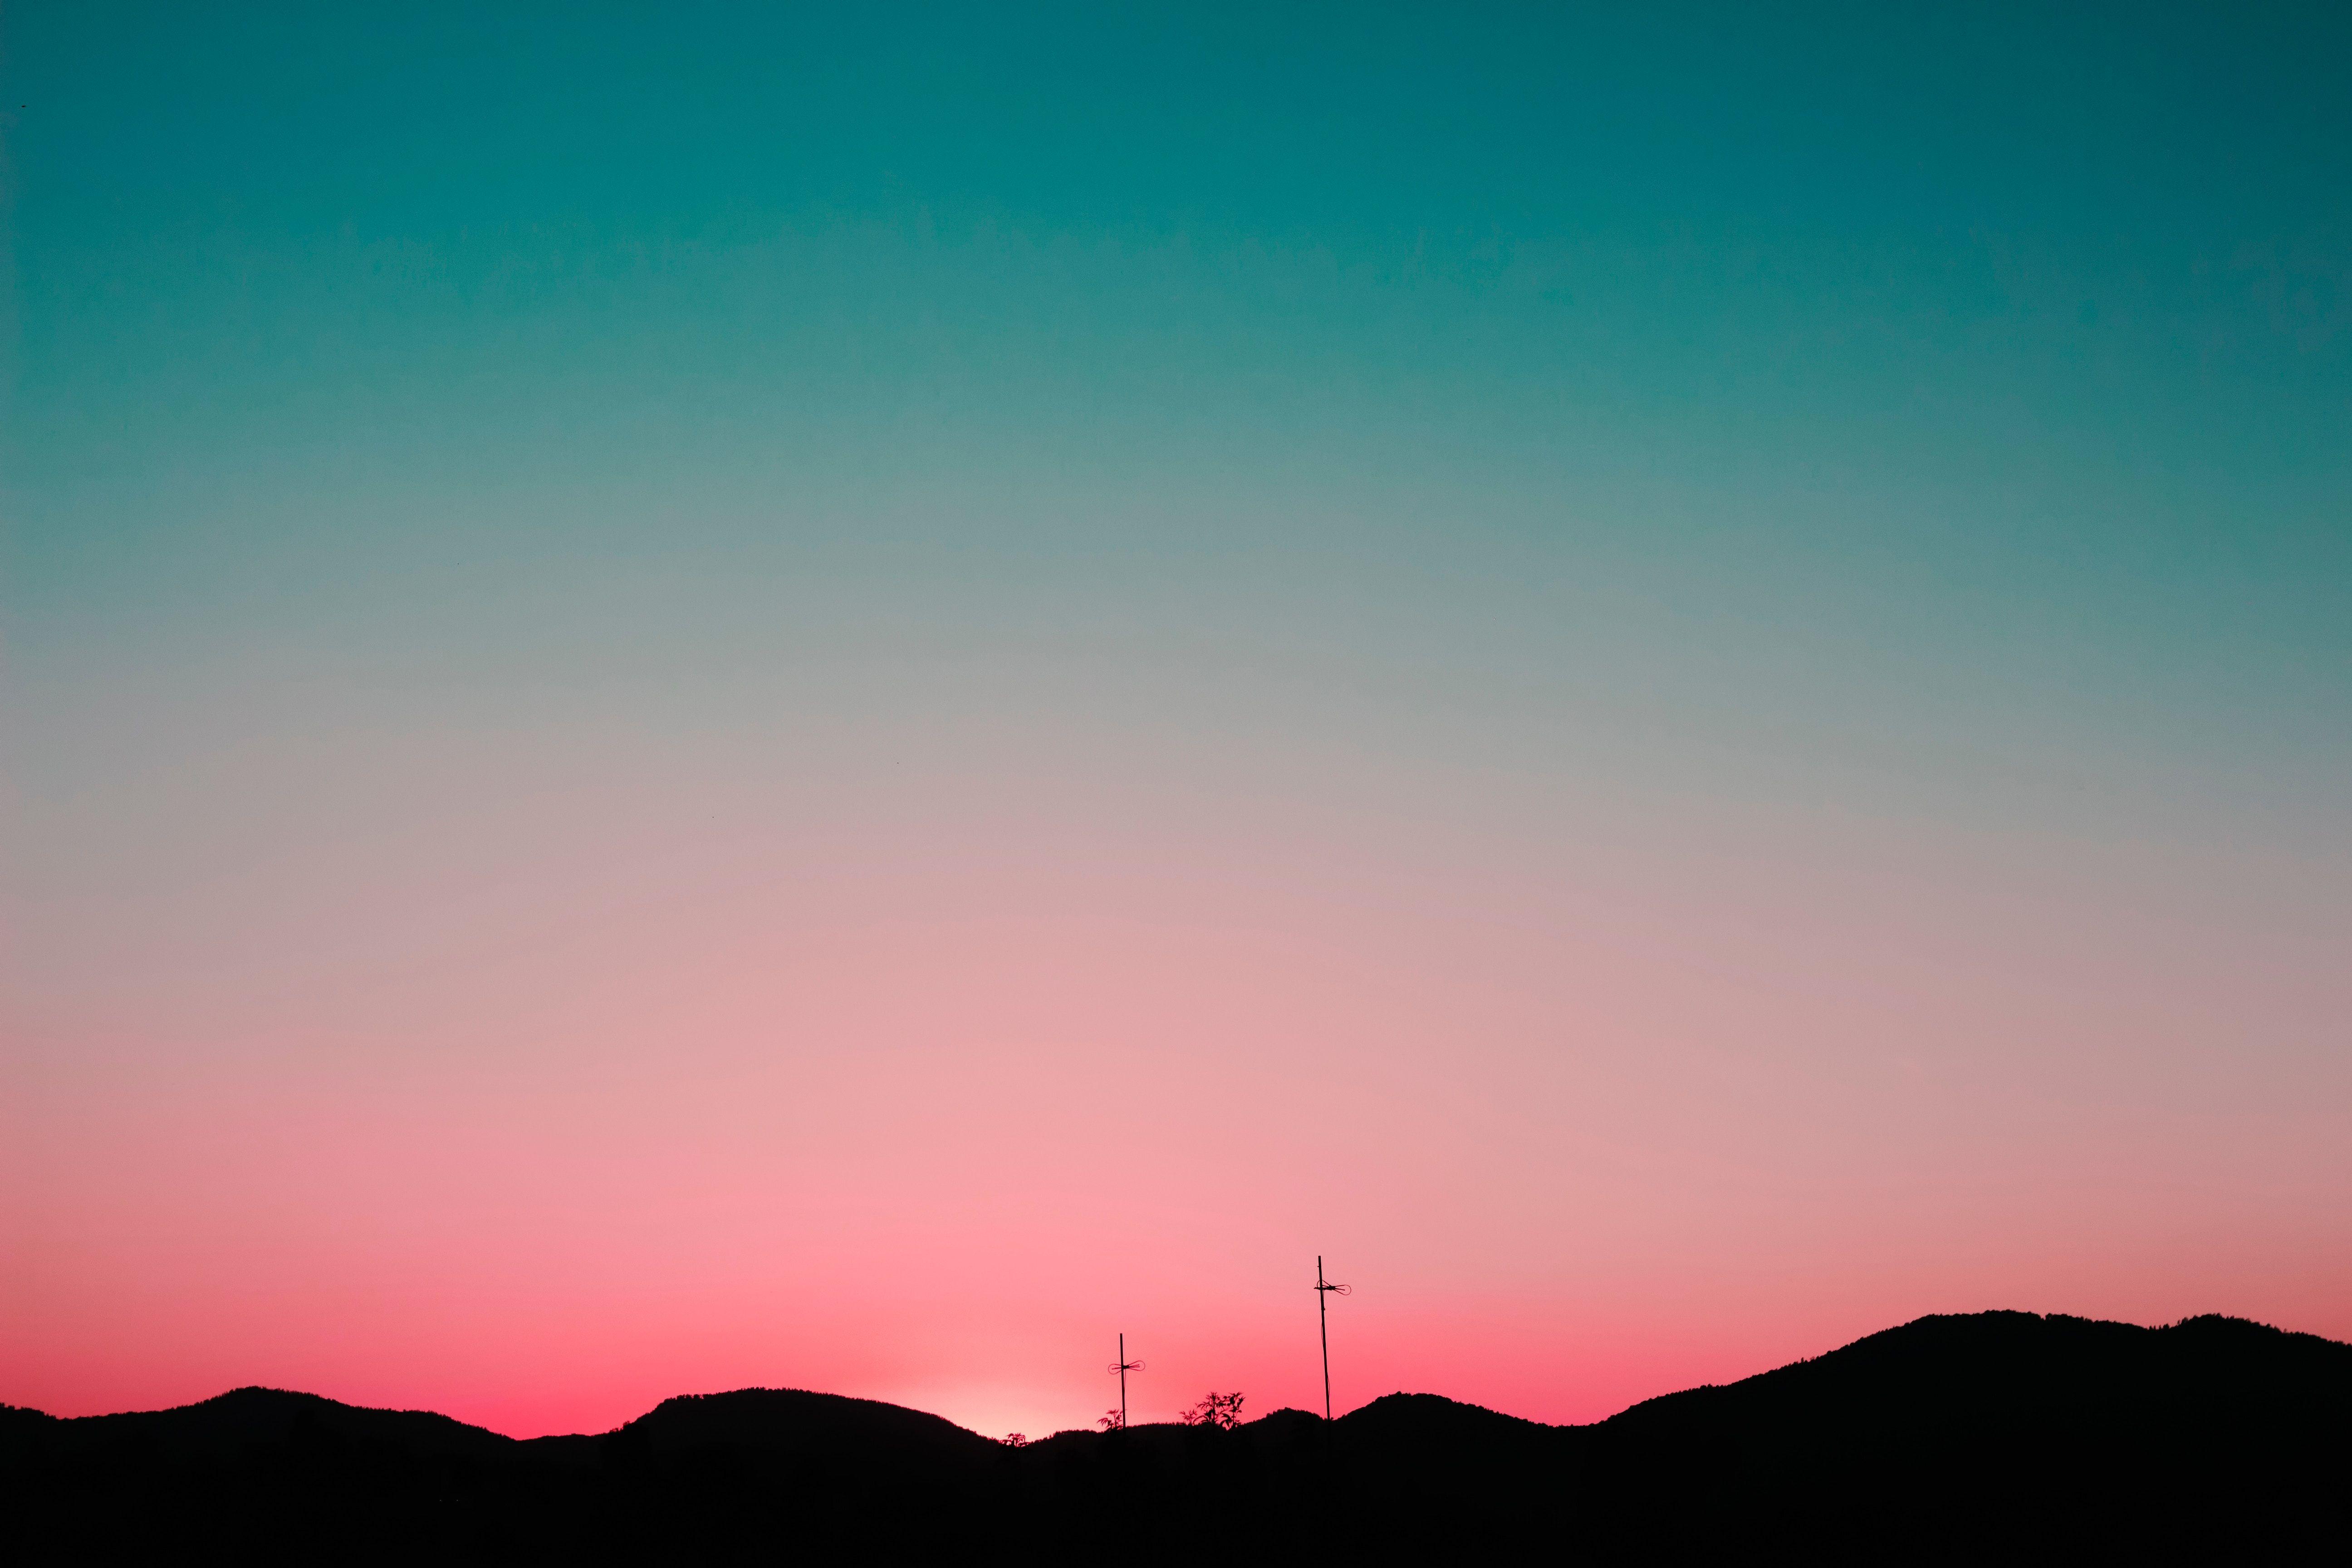 A sunset over a mountain range with wind turbines in the distance. - Sunset